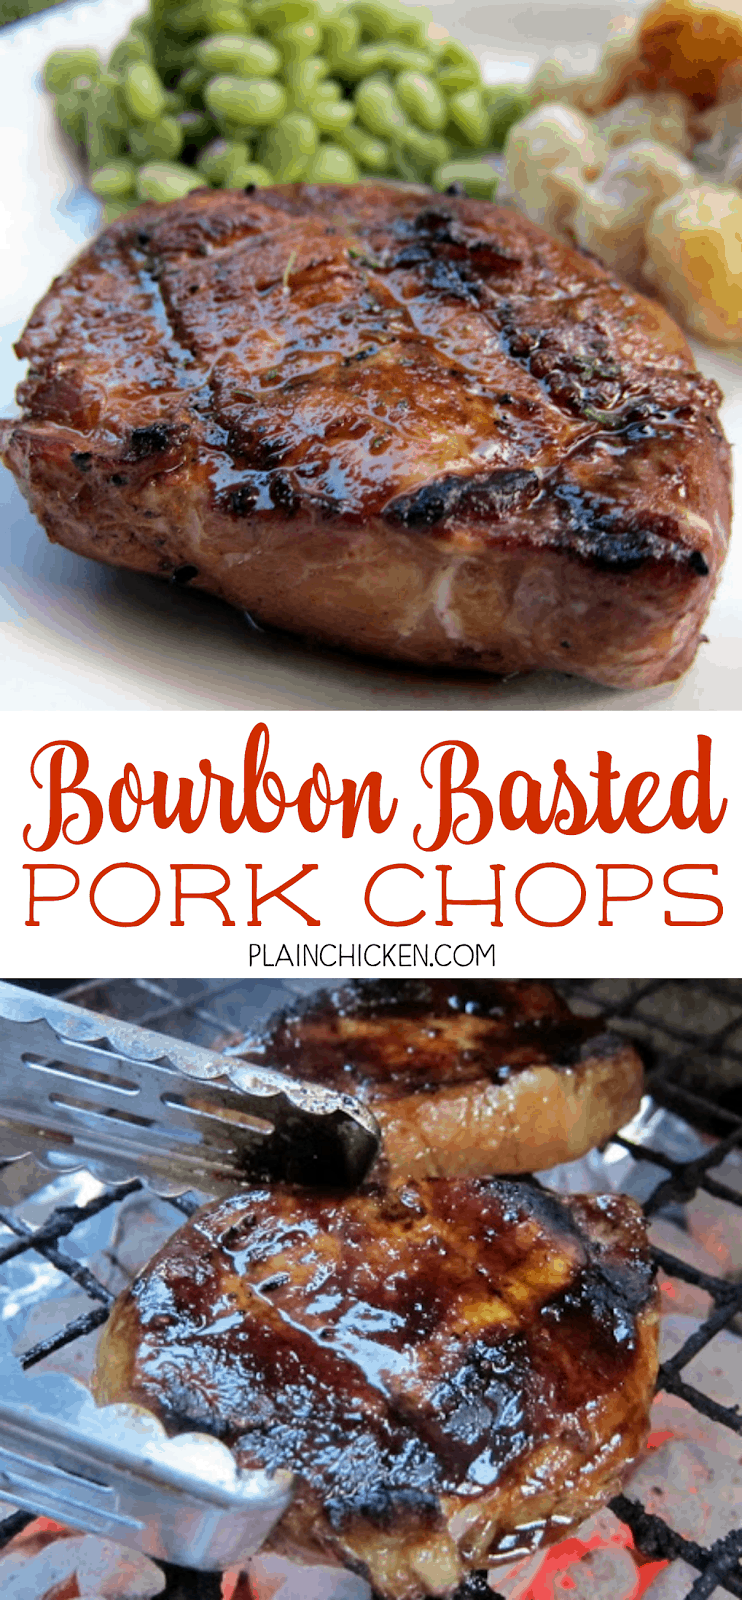 Bourbon Basted Pork Chops - pork chops basted in a quick homemade bourbon sauce - lemon juice, soy sauce, Worcestershire sauce, bourbon, onion, hot sauce and pepper. So easy and really good. A favorite at our BBQ parties!